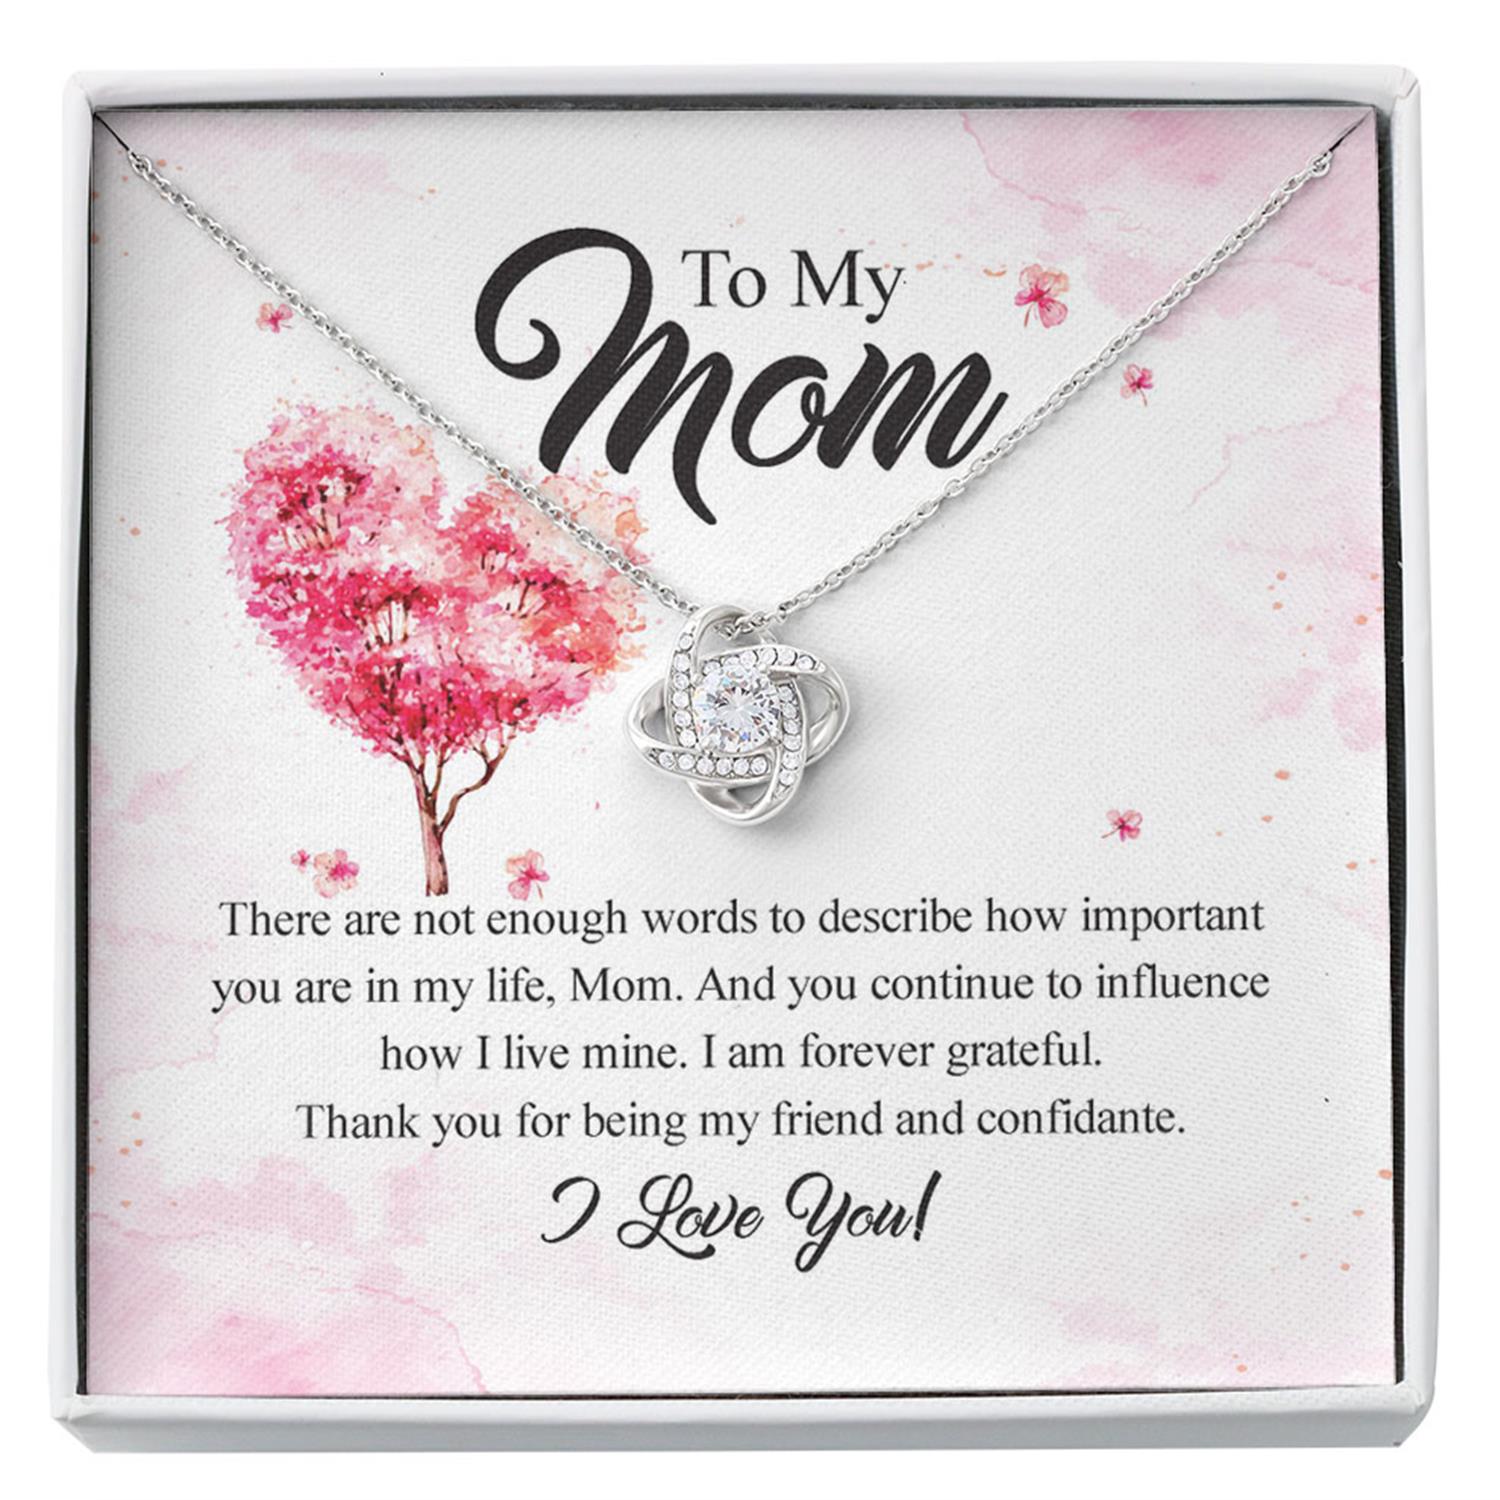 Mom Necklace, To My Mom Necklace Gift, Necklace For Mom, Mother's Day Gift, Necklace For Mother Custom Necklace